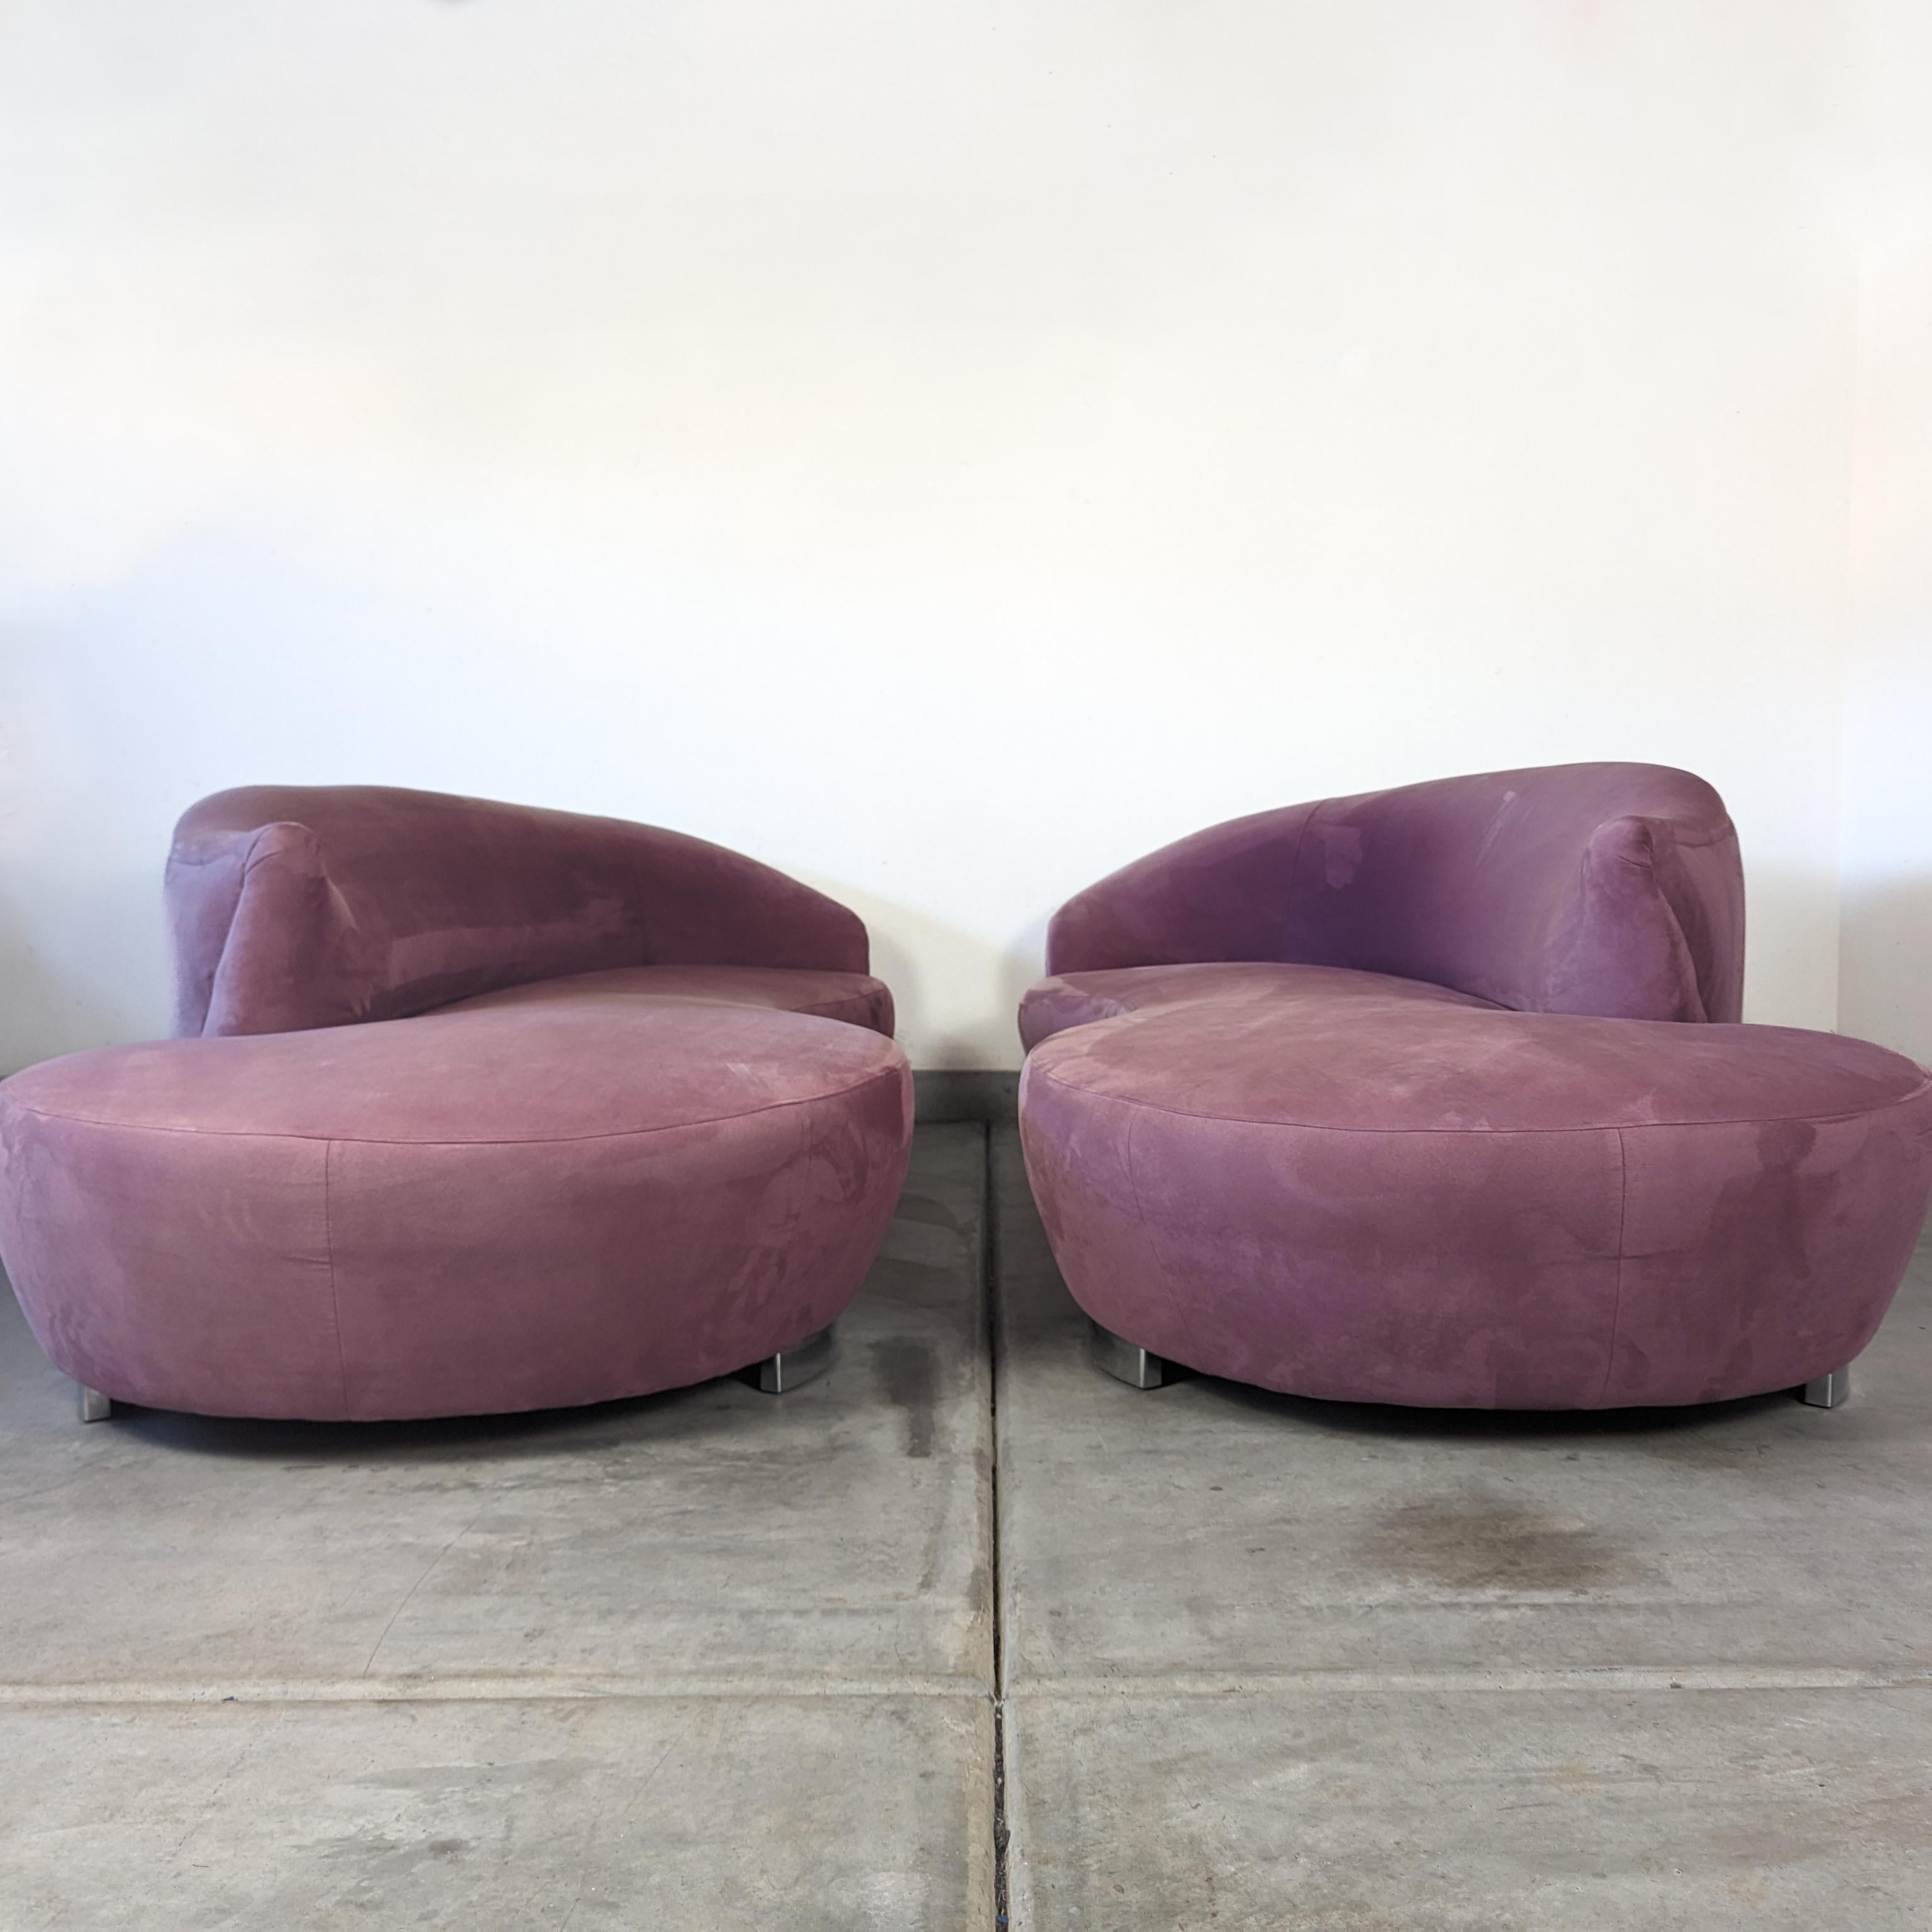 Pair of Postmodern Mauve Pink Serpentine Cloud Sofas, c1990s In Excellent Condition For Sale In Chino Hills, CA